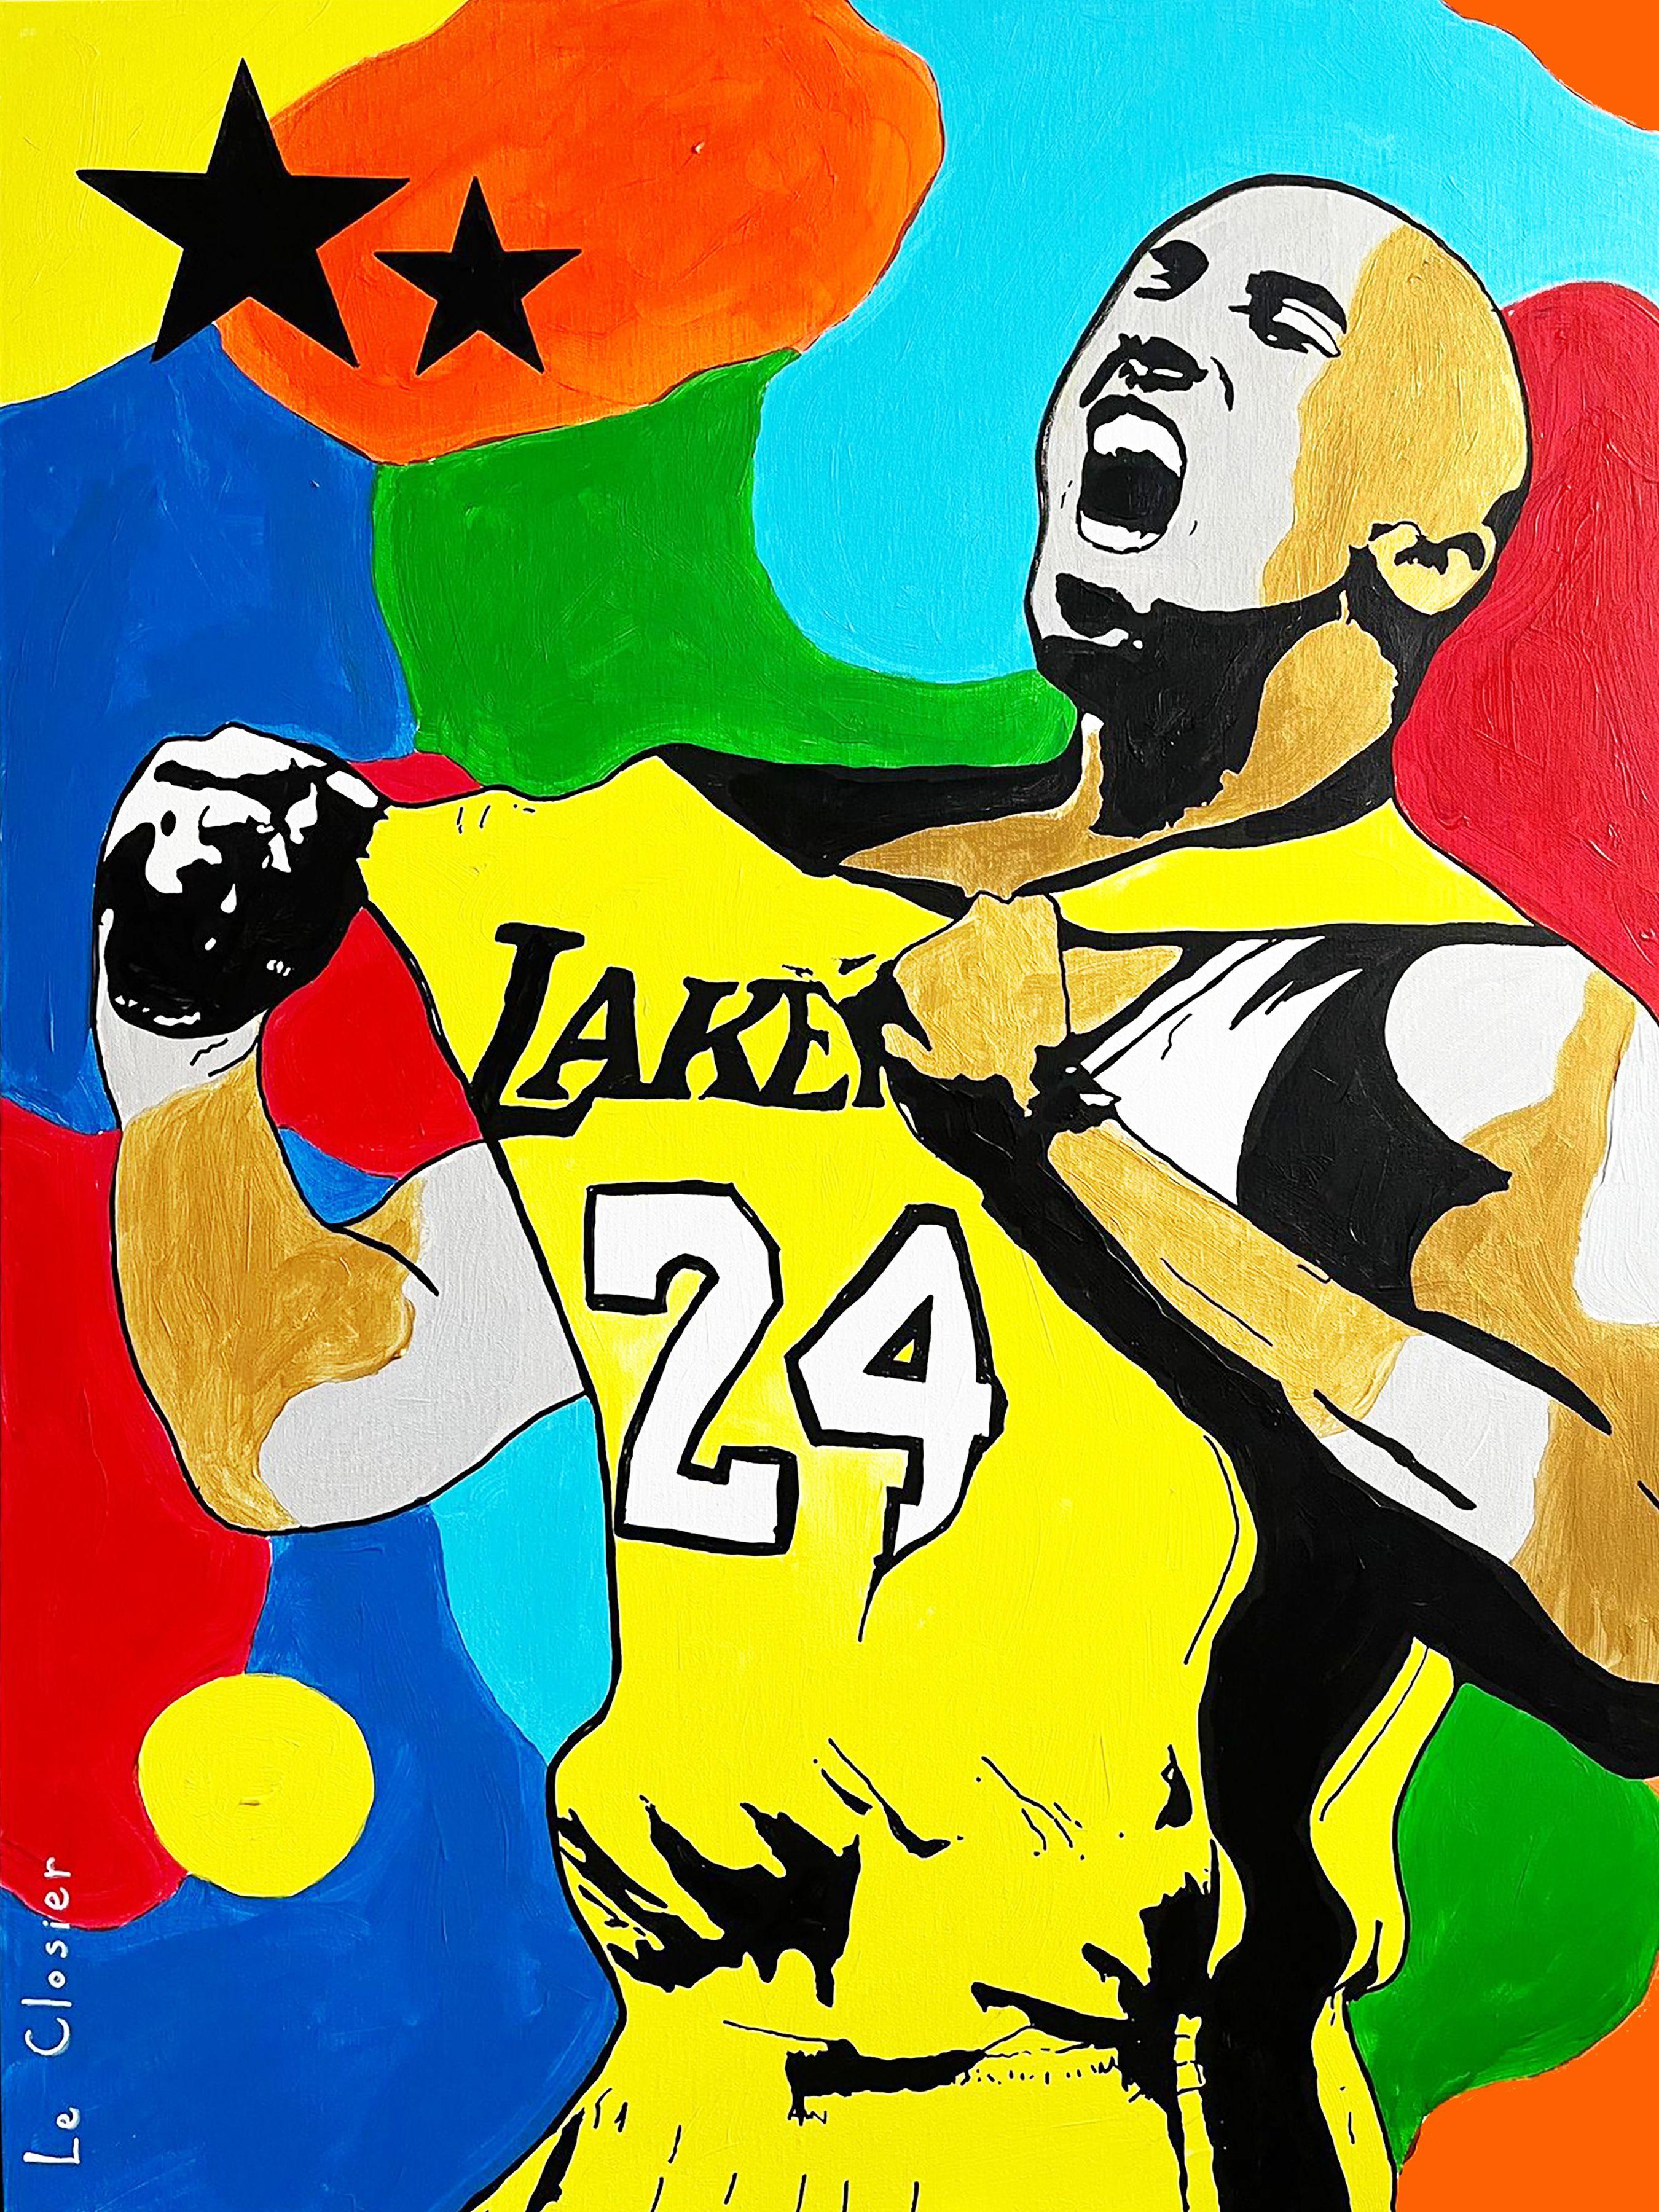 Tribute to Los Angeles Lakers player and NBA legend Kobe Bryant (1978-2020).  The 2 black stars represent Kobe and his daughter Gianna.  They both died with seven other people in a dramatic helicopter crash in Calabasas, CA on January 26, 2020. 